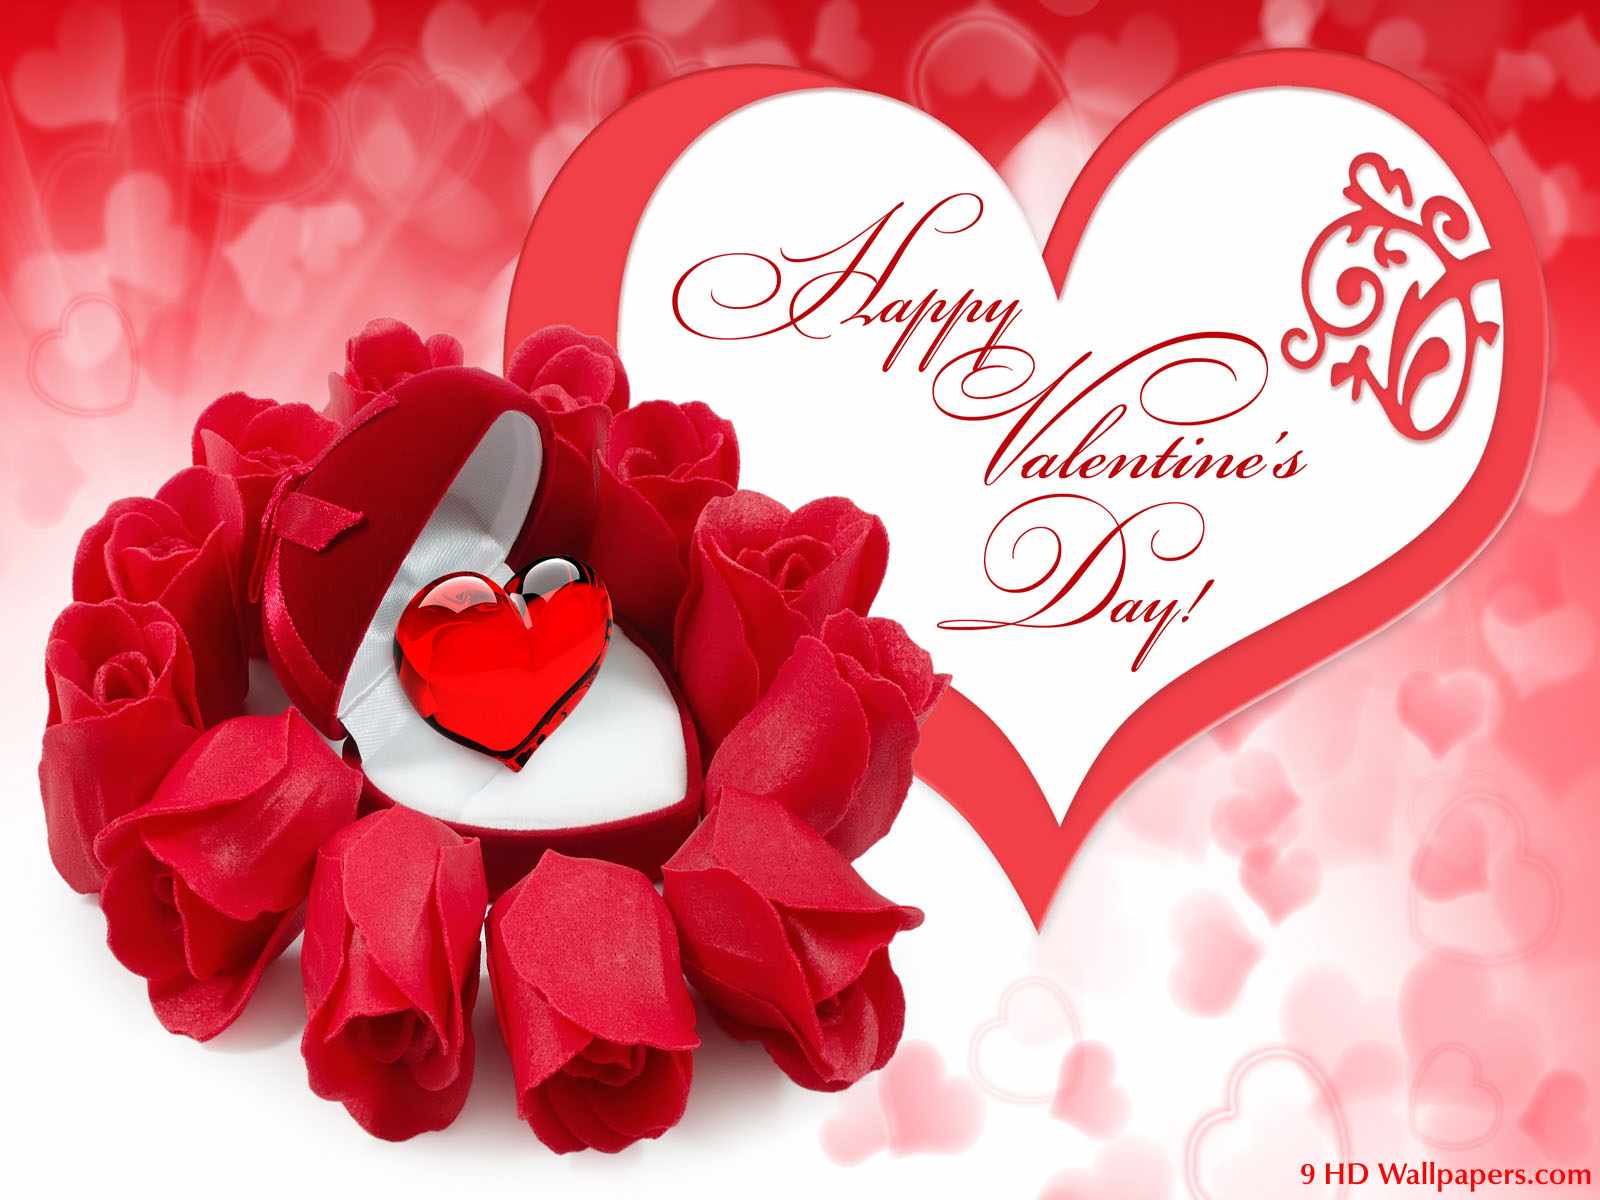 Download Best Happy Valentine Day Wallpapers for Kids - The Quotes